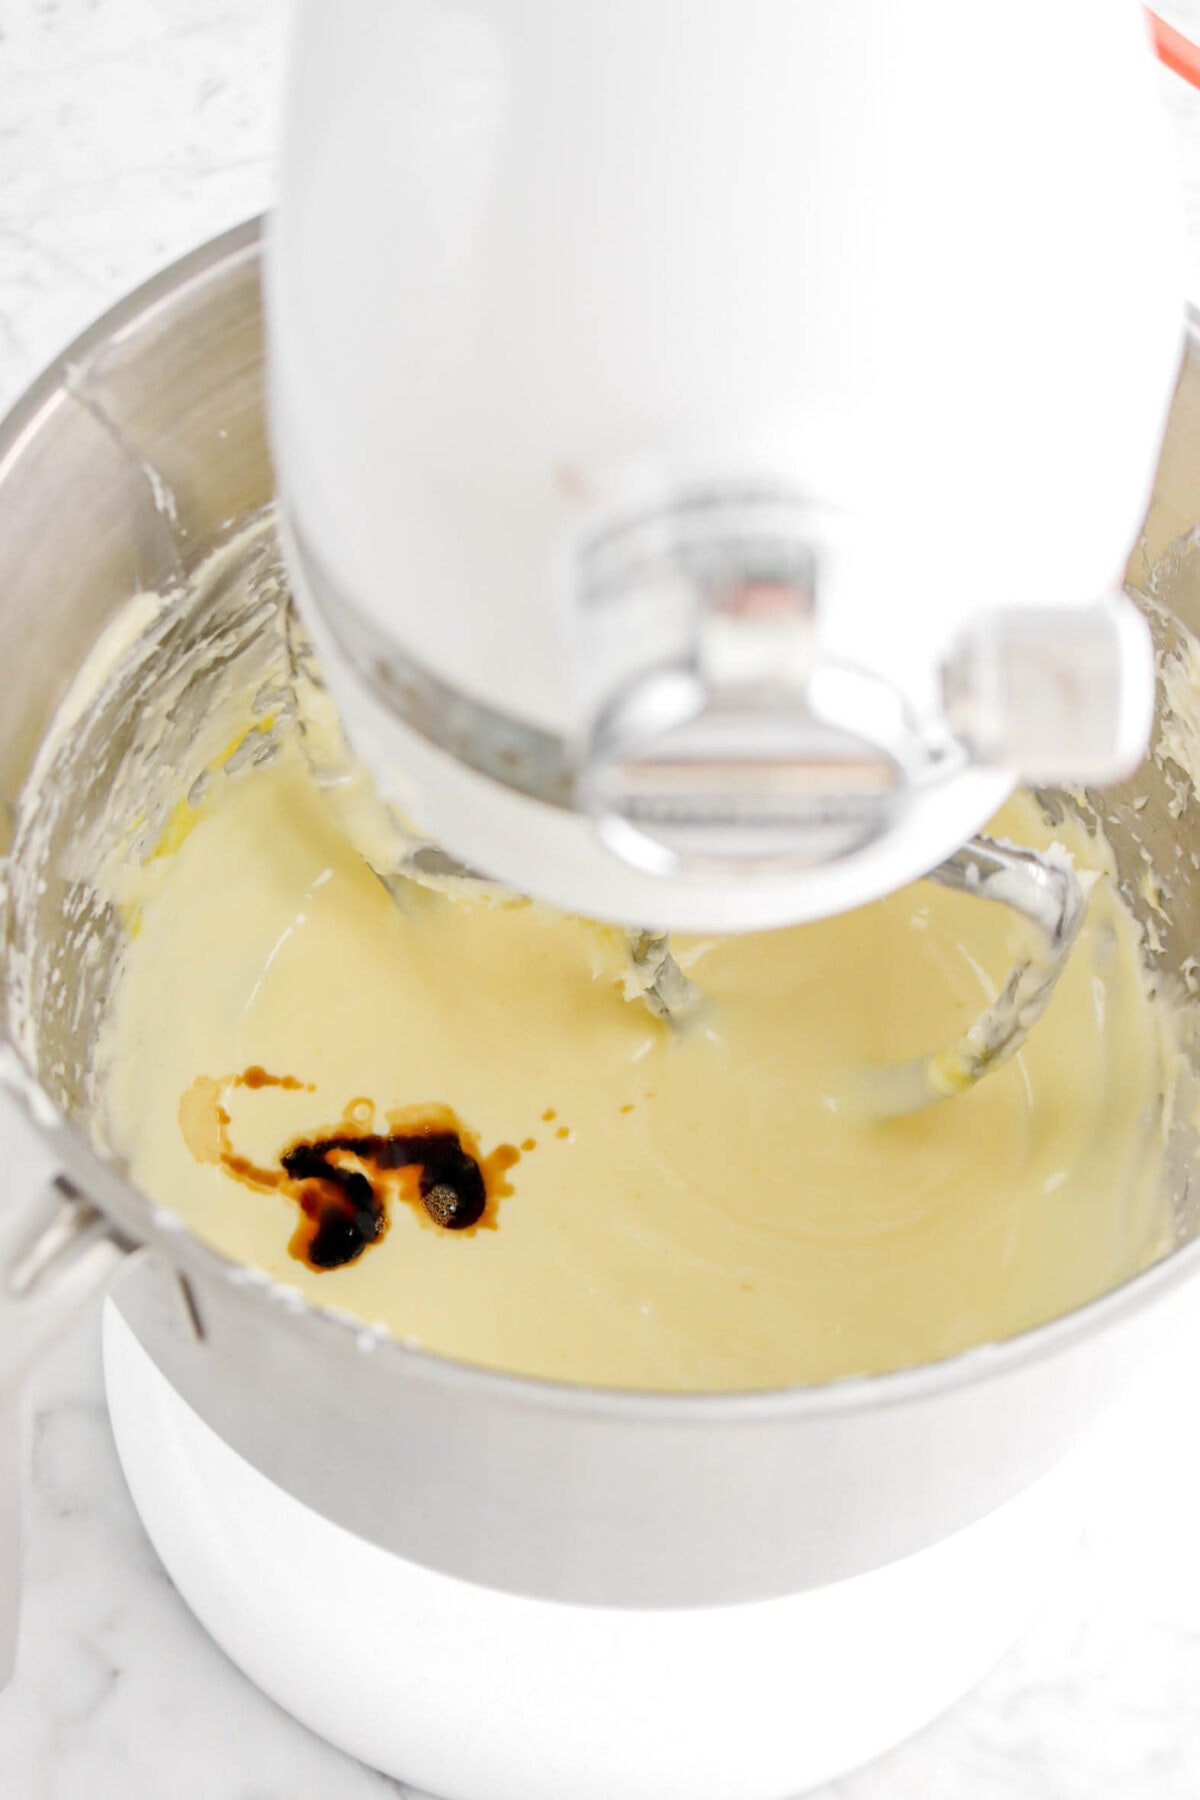 vanilla added to butter and egg mixture